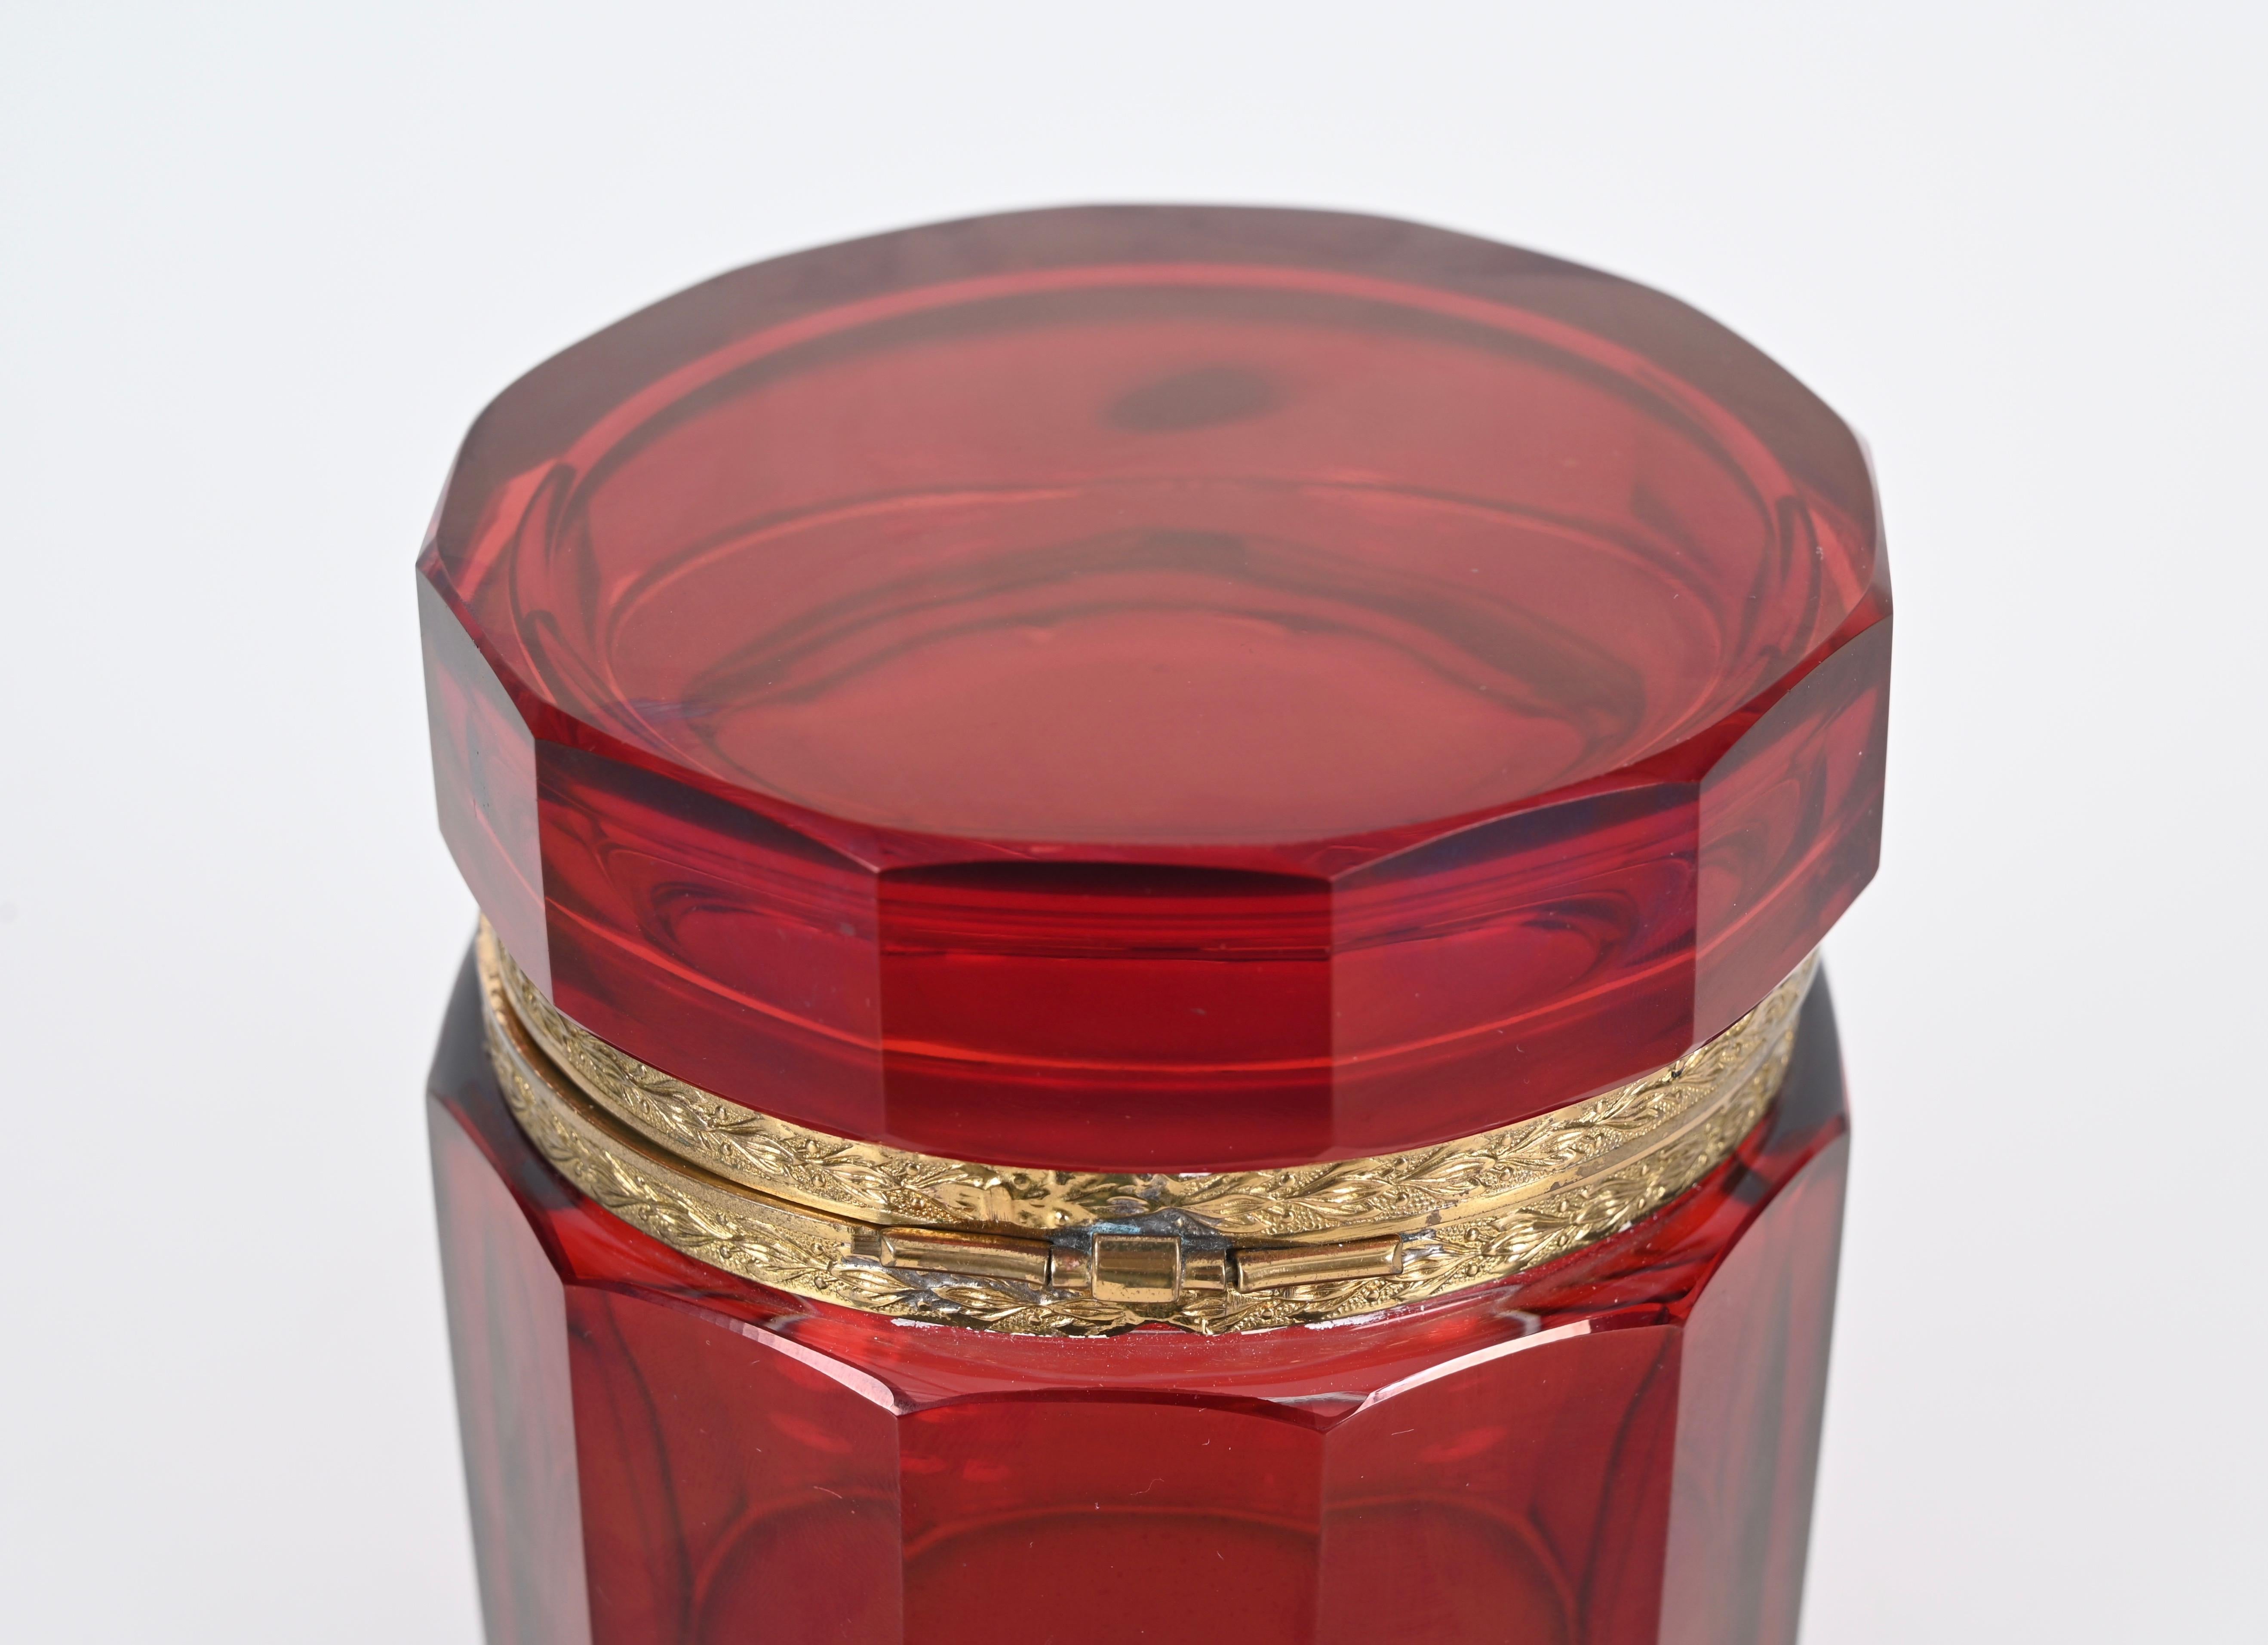 Ruby Red and Gilt Silver Faceted Murano Glass Jewelry Box, Italy 1920s For Sale 2